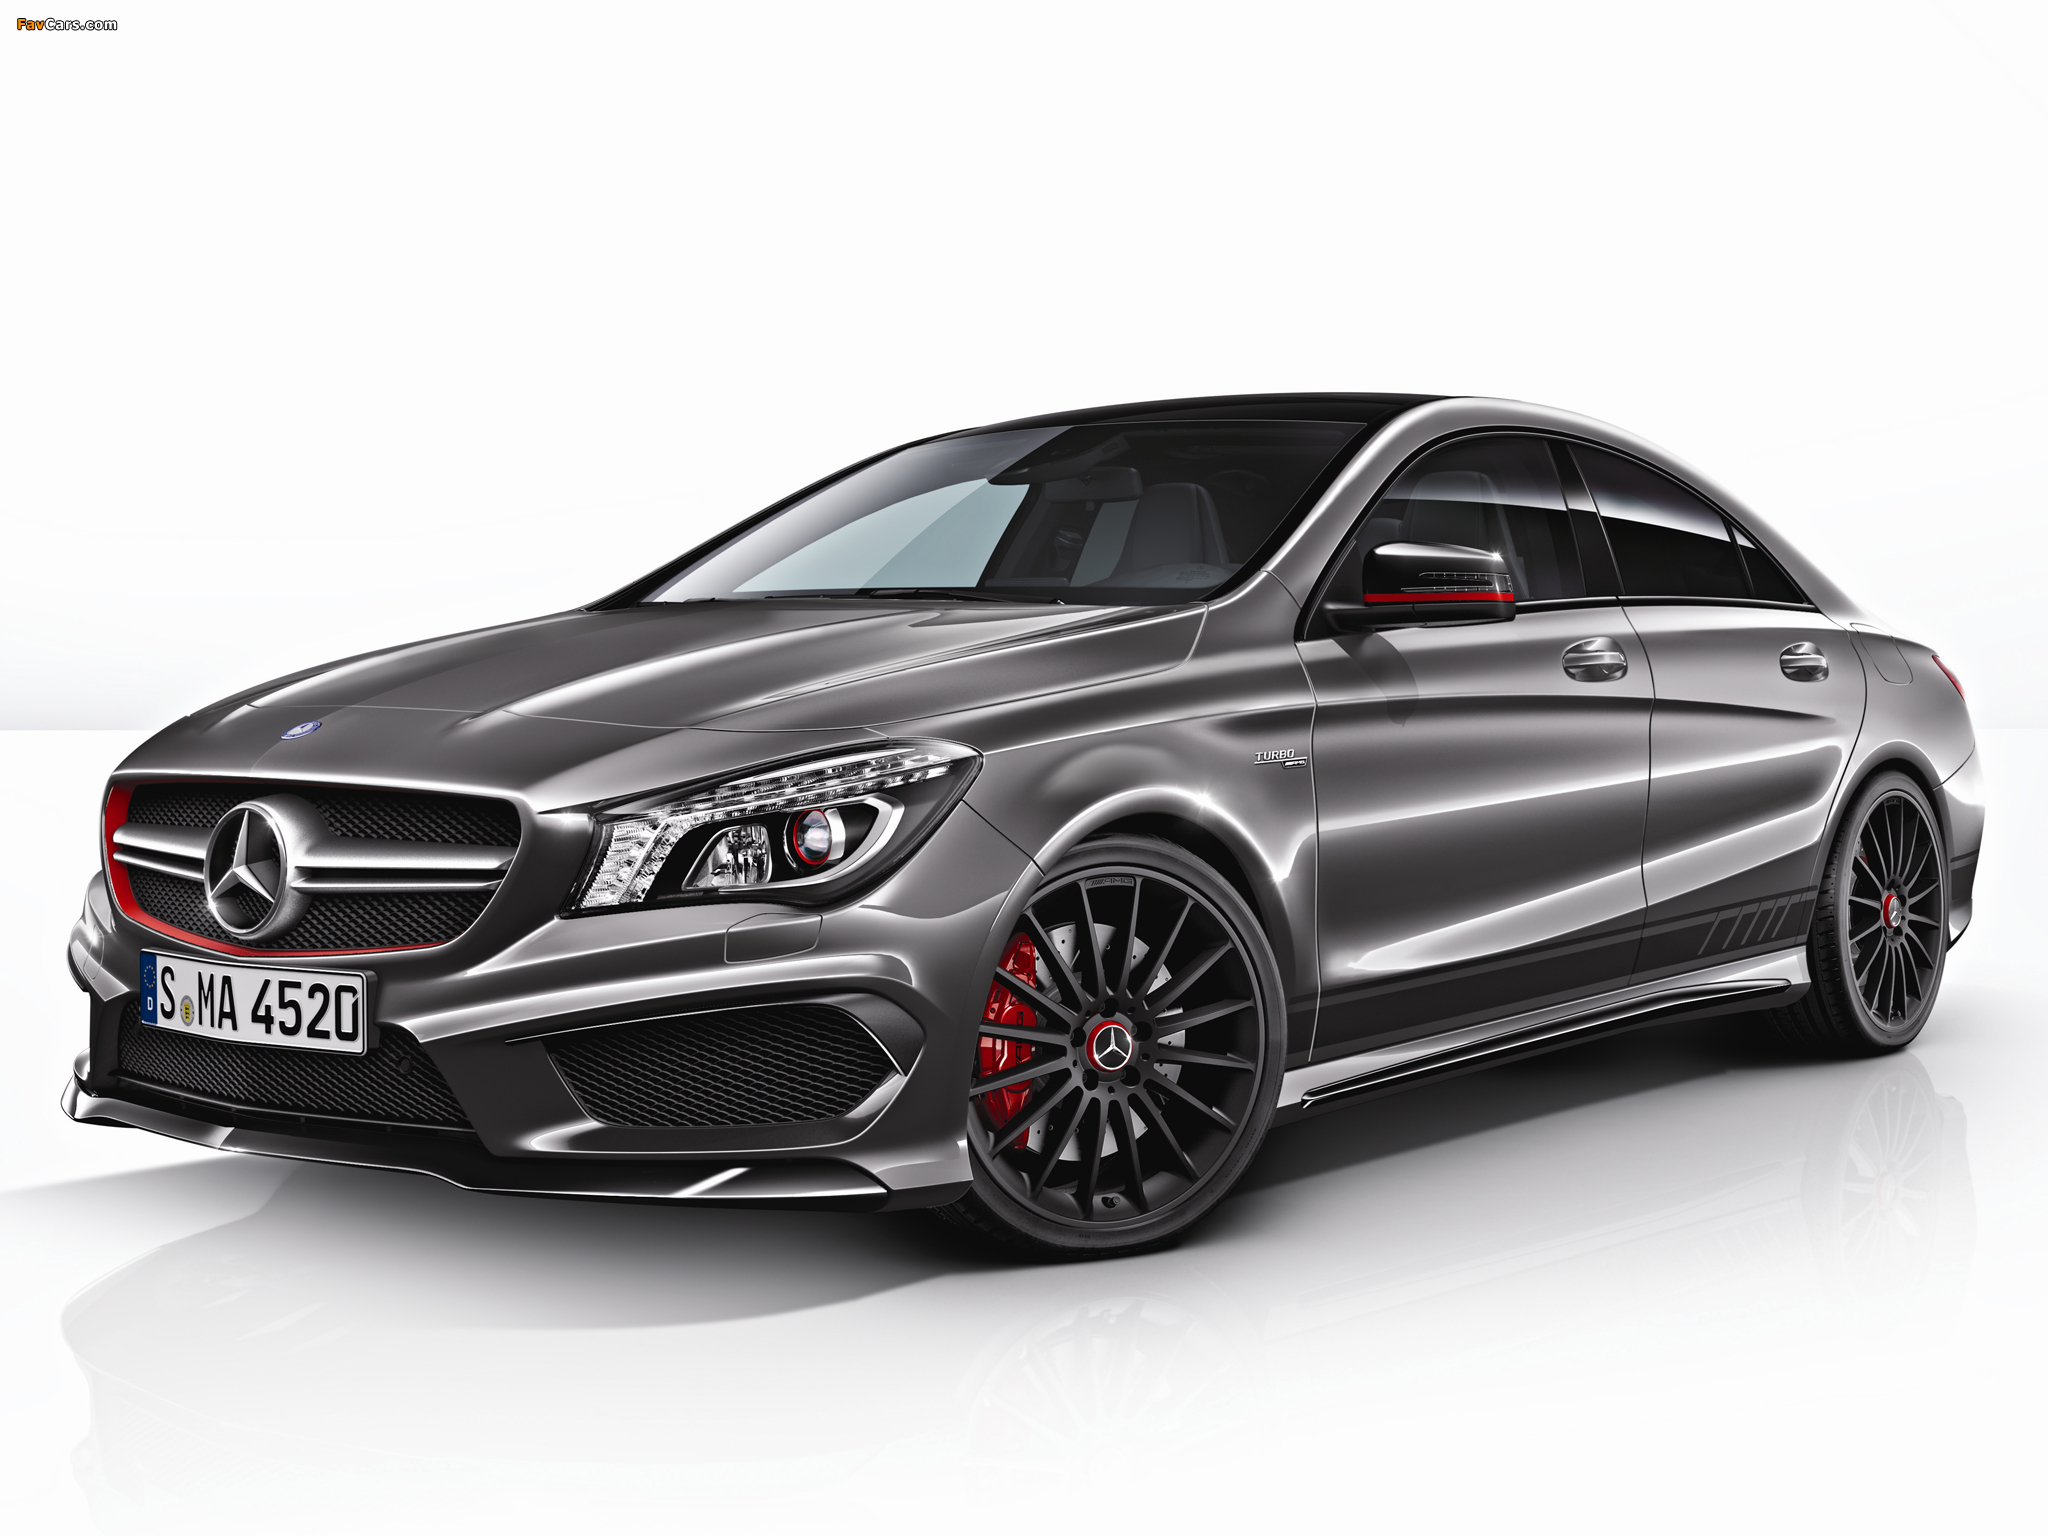 Mercedes-Benz CLA 45 AMG Edition 1 (C117) 2013 pictures (2048 x 1536)